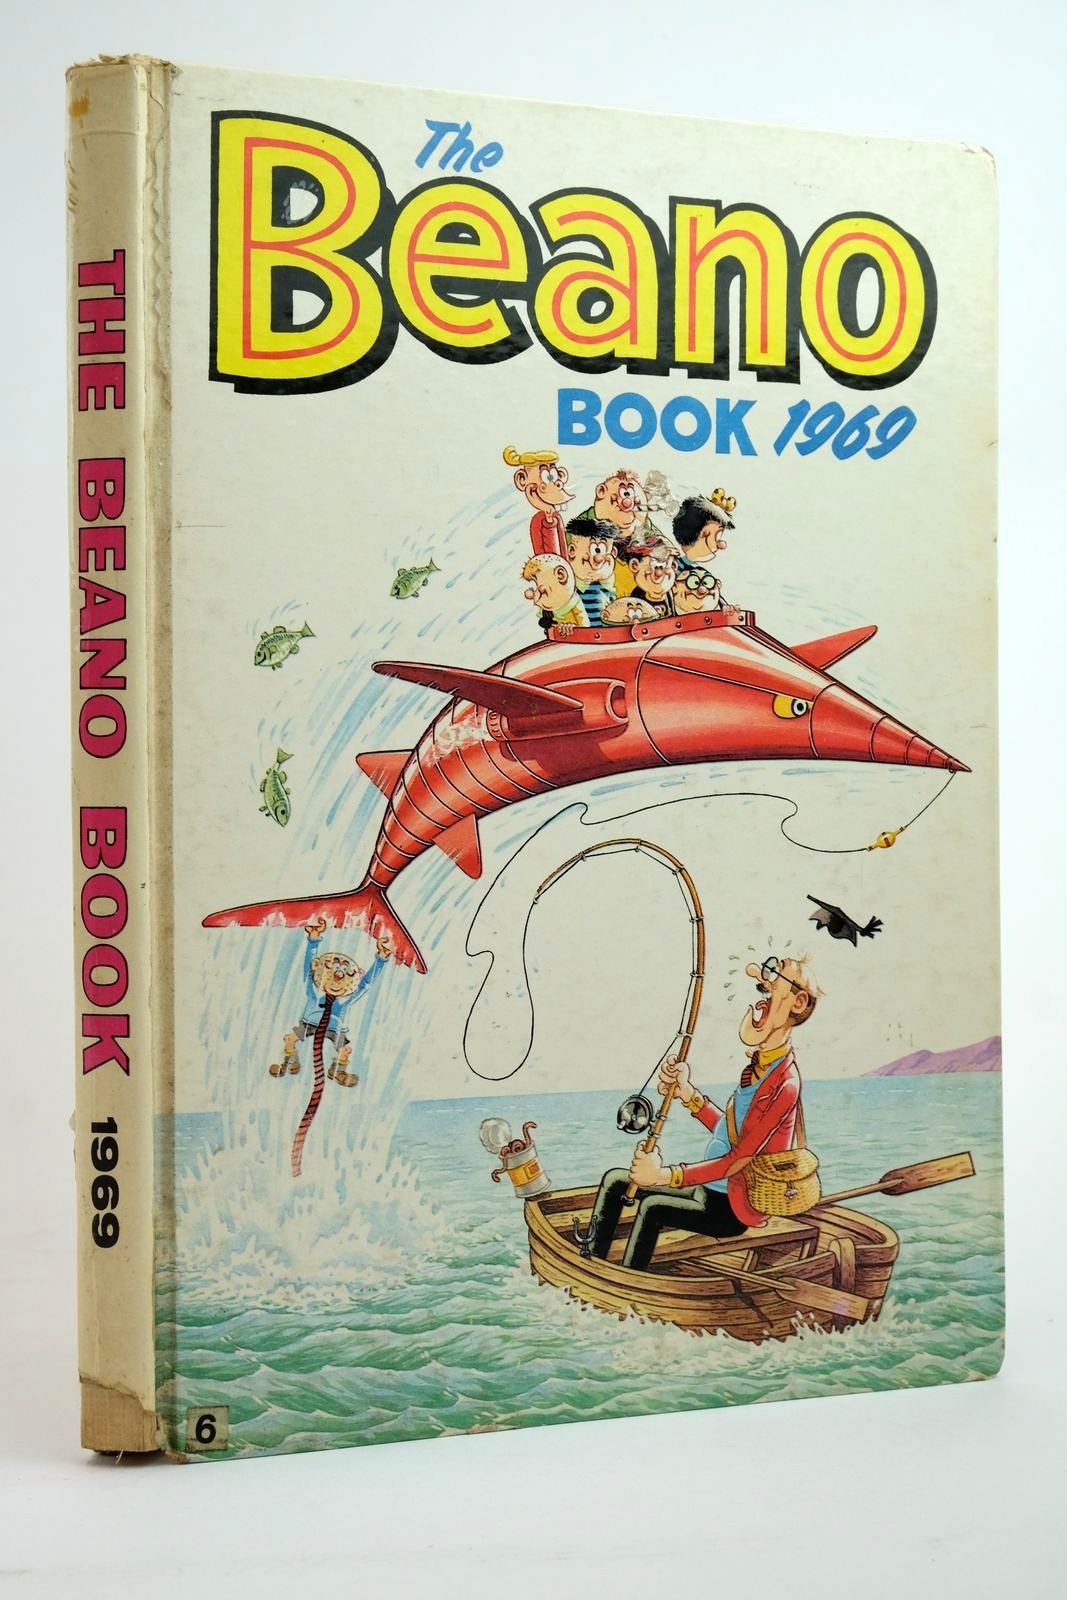 Photo of THE BEANO BOOK 1969 published by D.C. Thomson &amp; Co Ltd. (STOCK CODE: 2135425)  for sale by Stella & Rose's Books